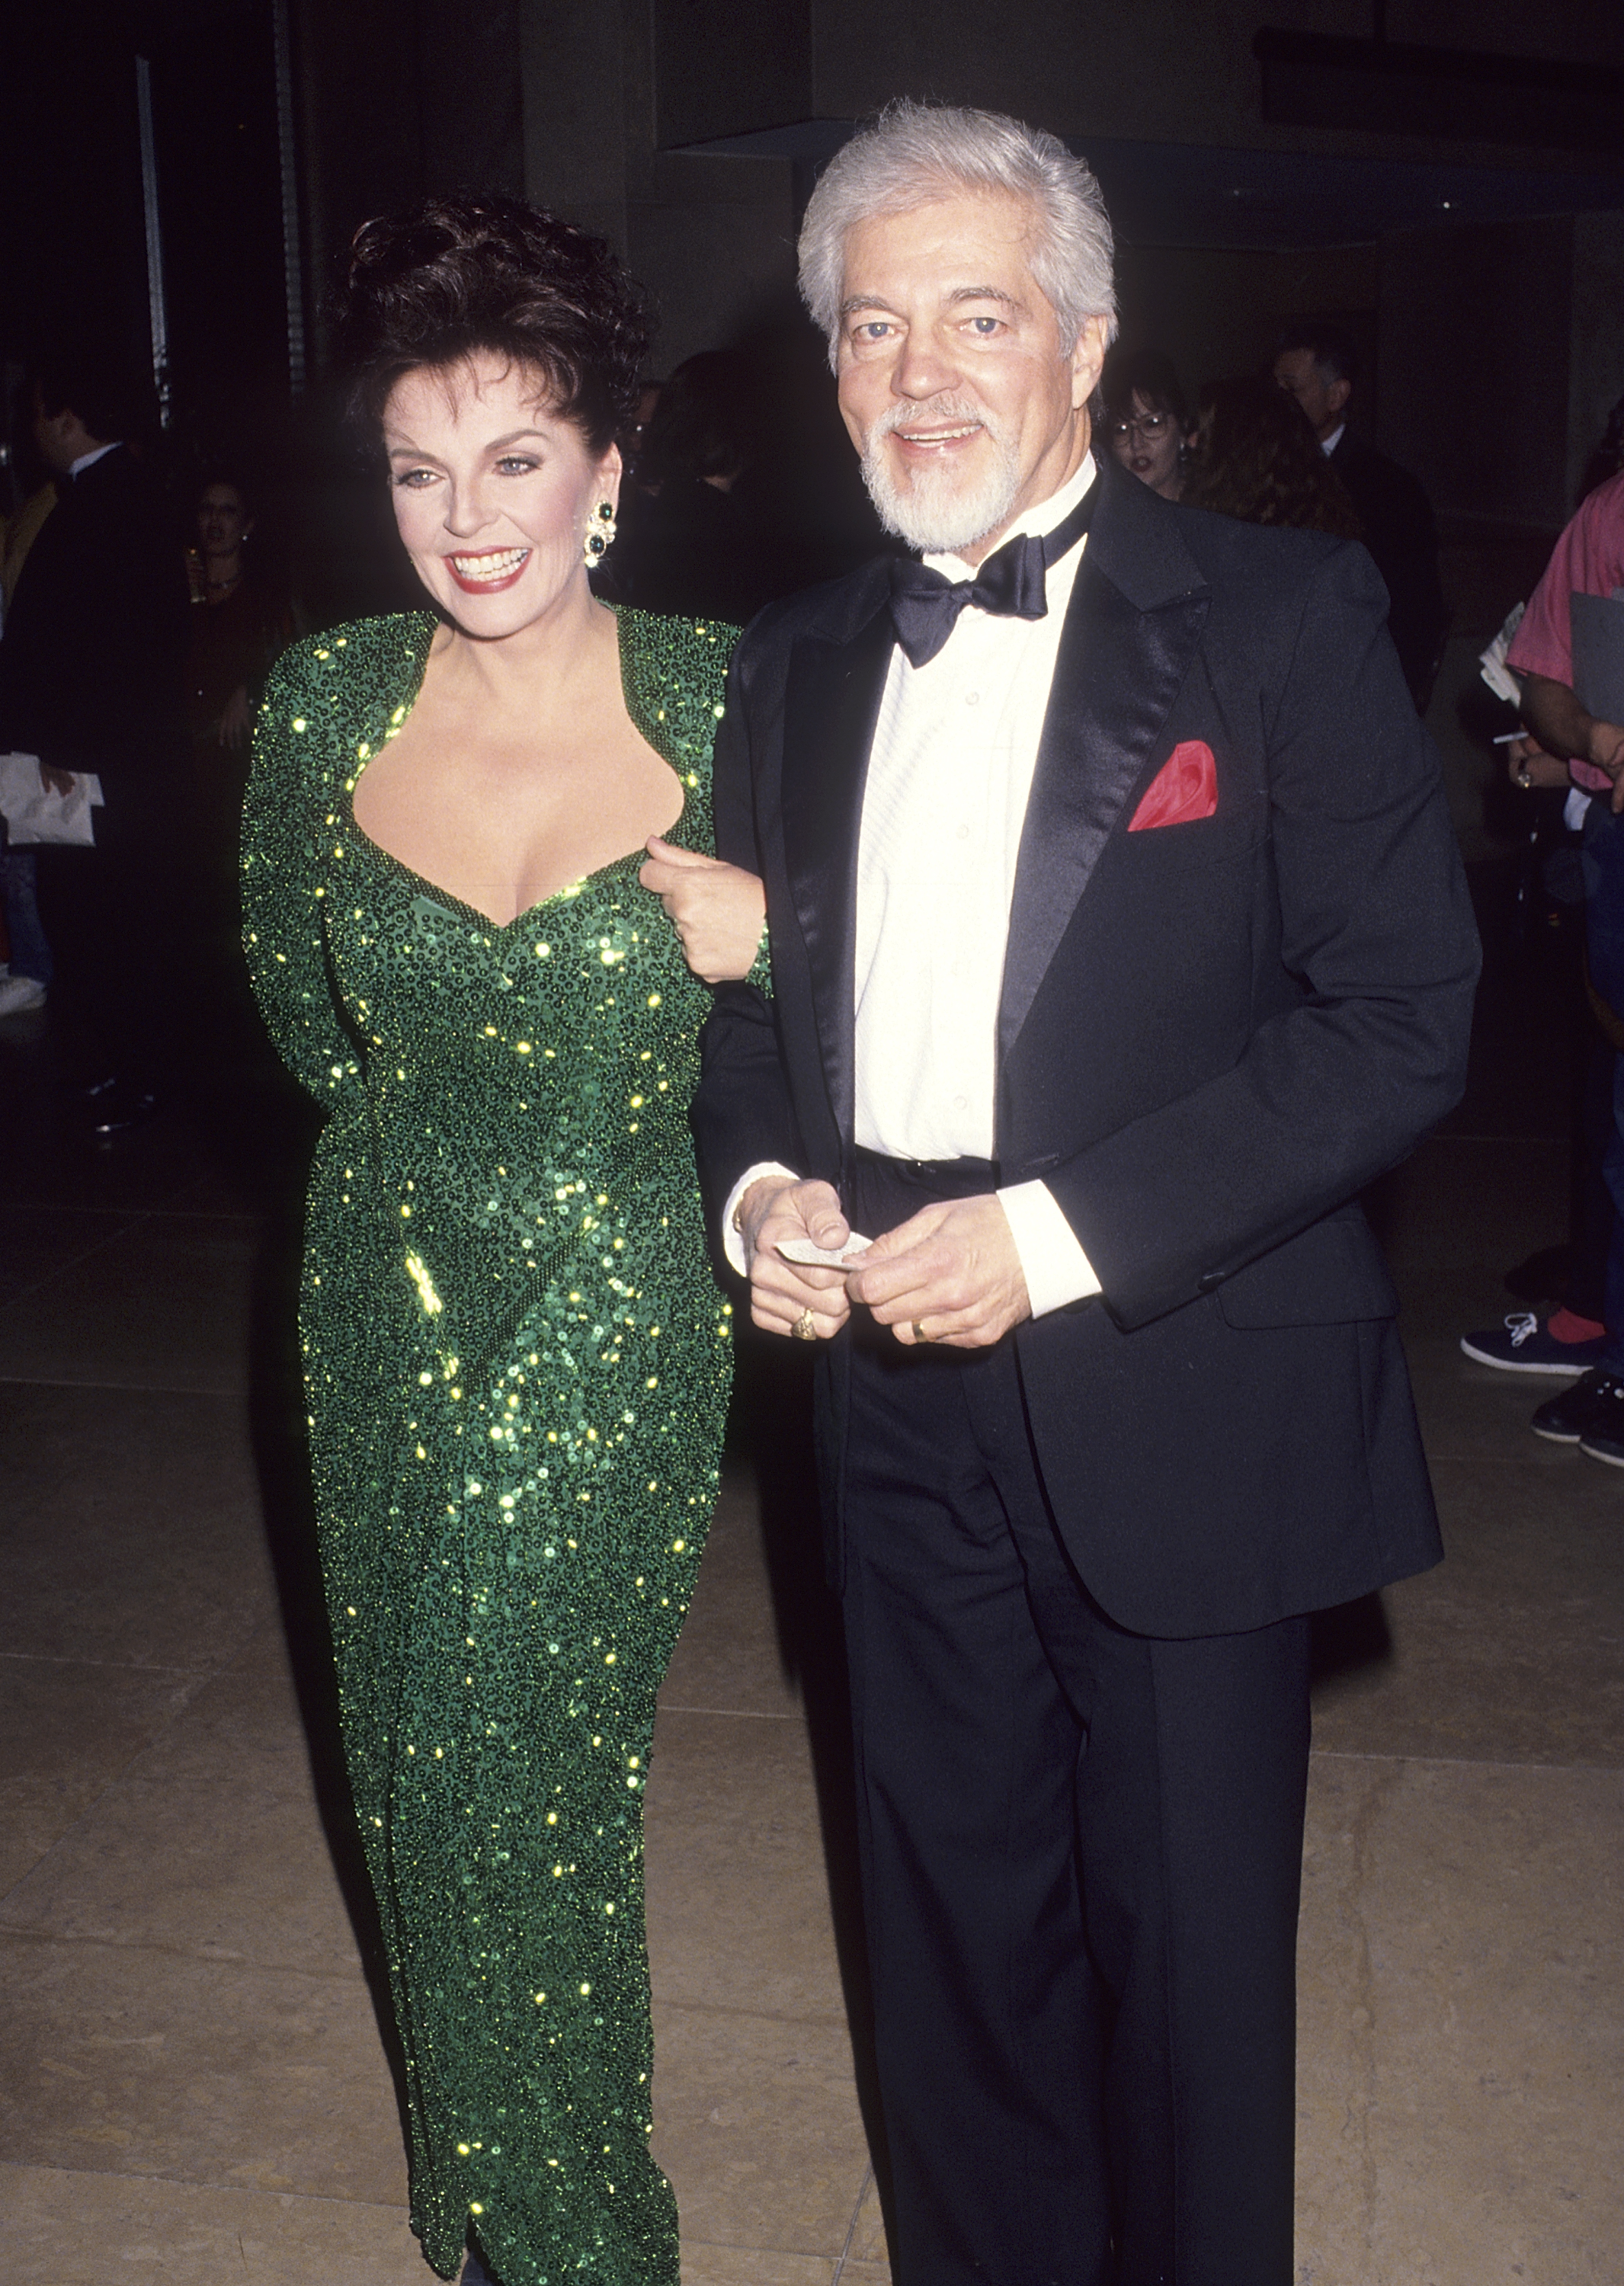 Susan Seaforth Hayes and her husband Bill Hayes attend the Eighth Annual Soap Opera Digest Awards at the Beverly Hilton Hotel on January 10, 1992 in Beverly Hills, California | Source: Getty Images